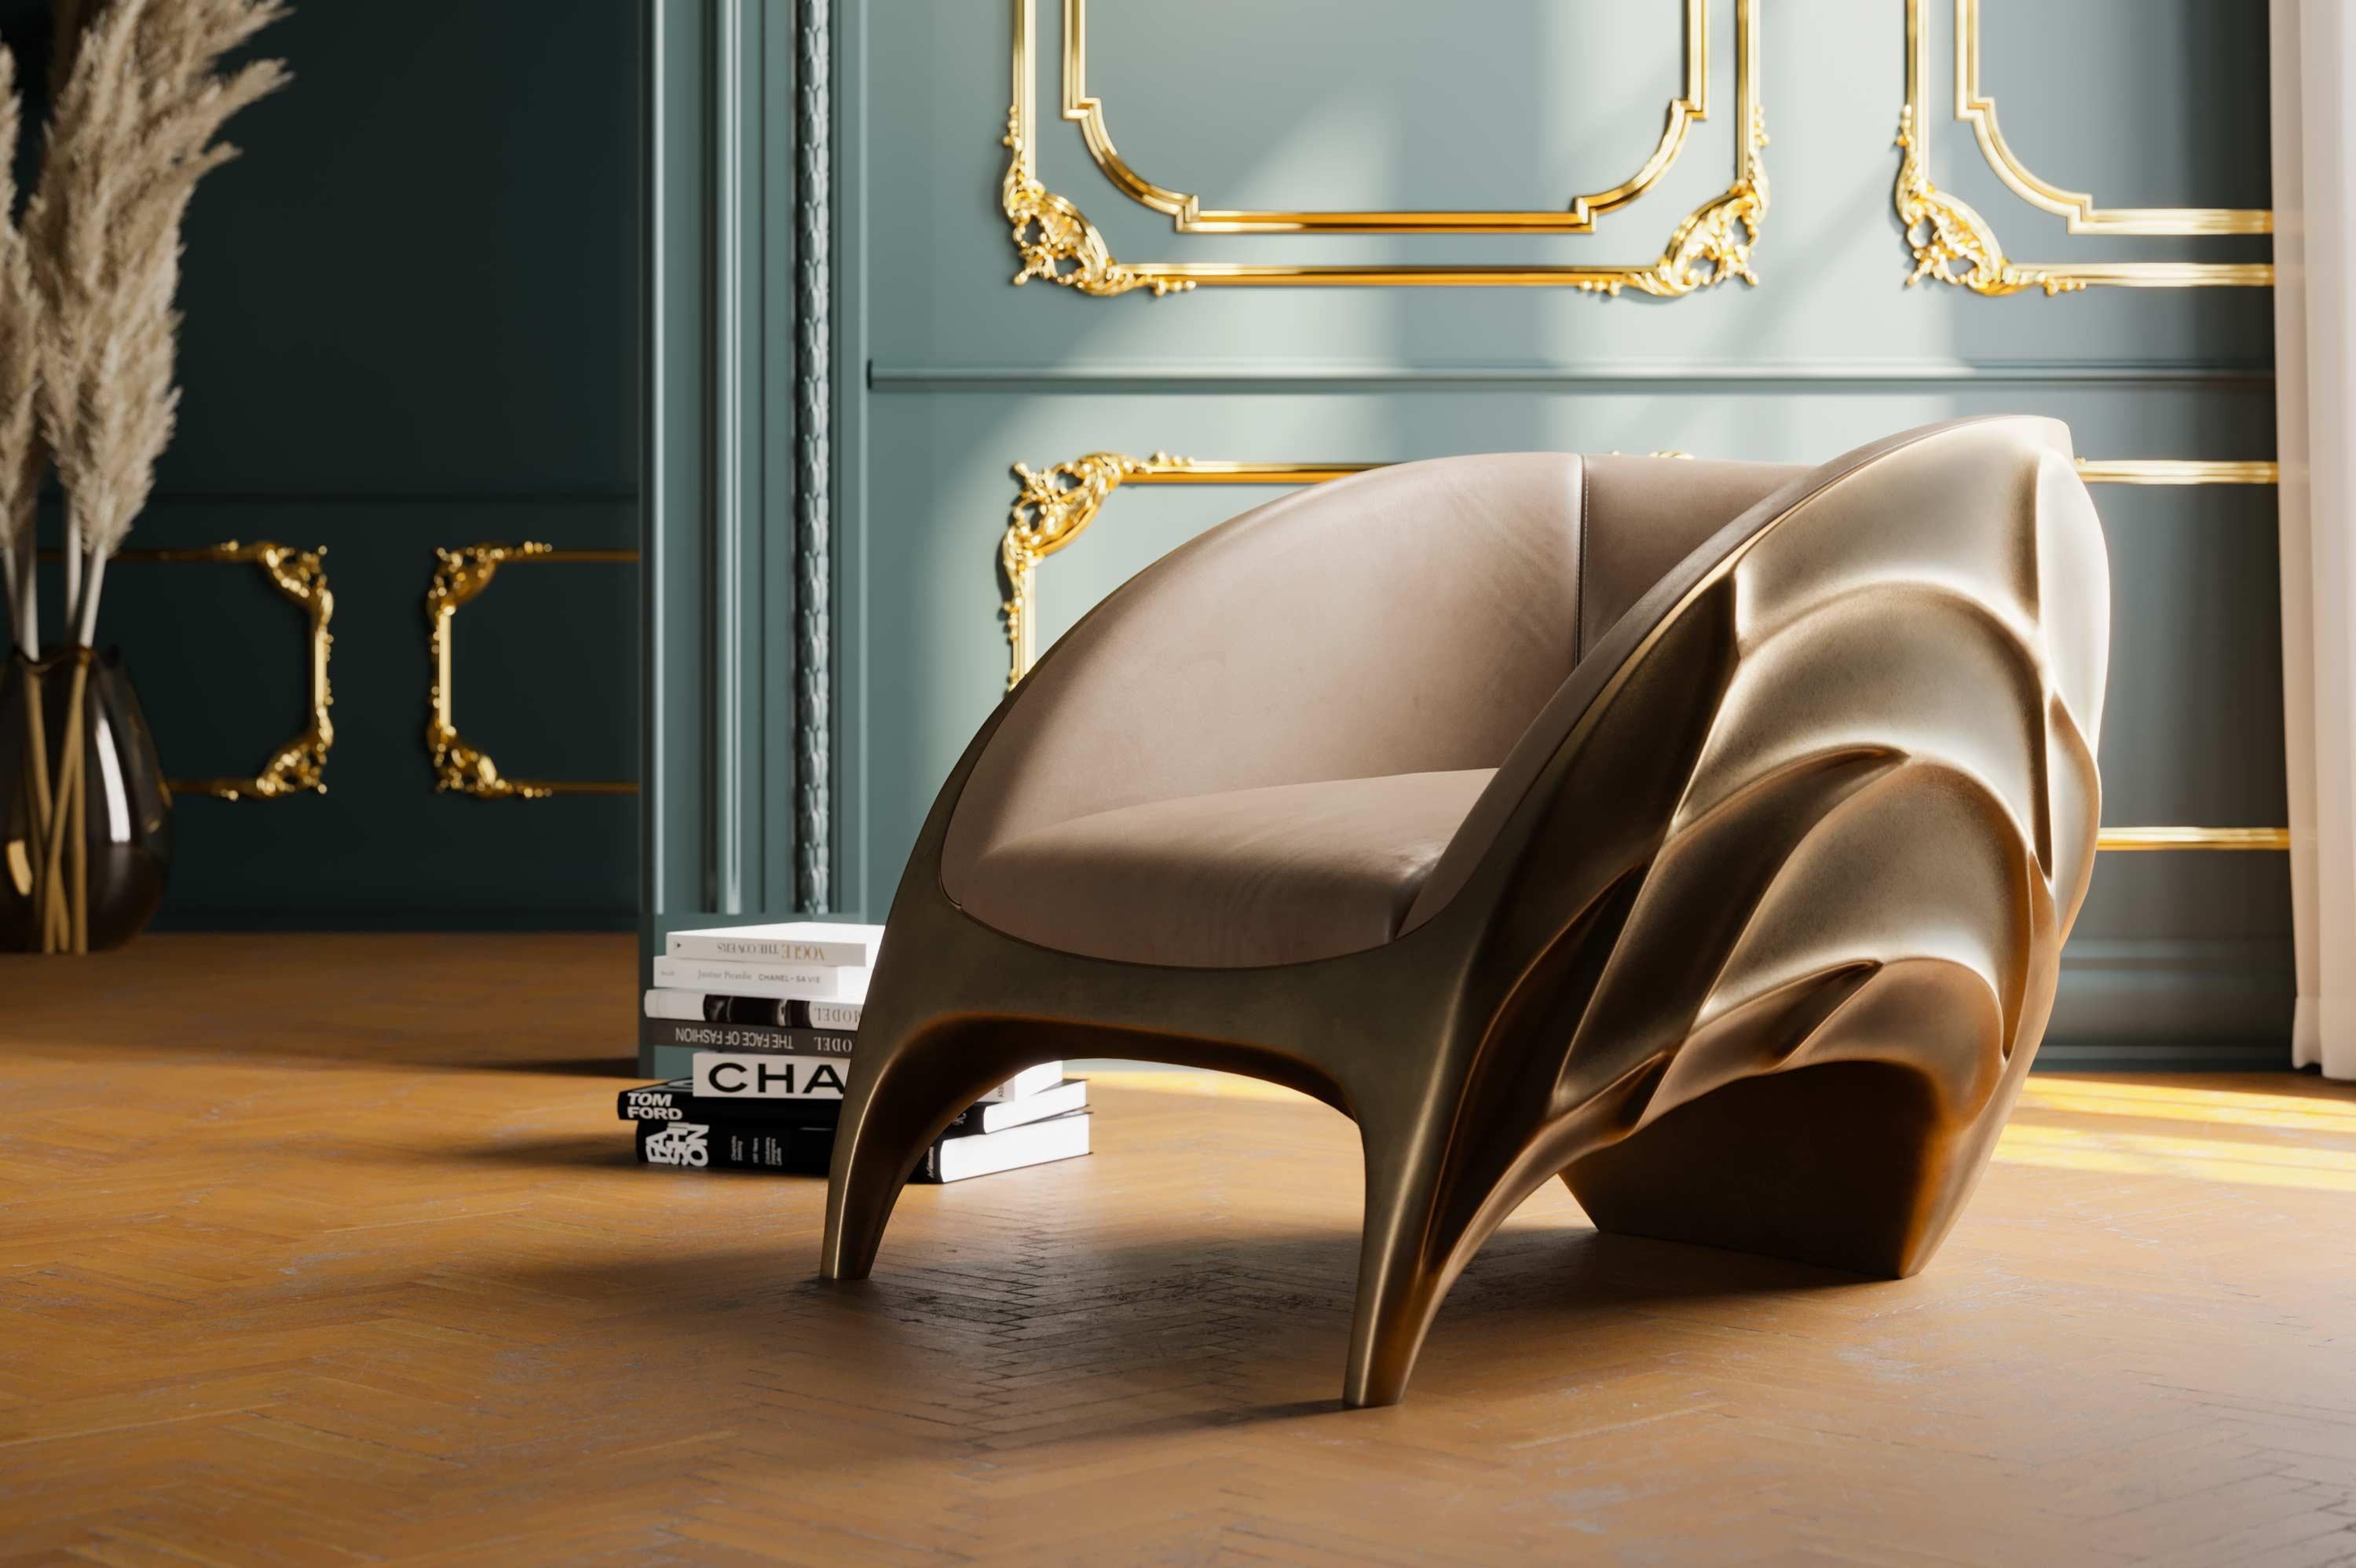 Triton is a unique armchair that combines bold finishes, with an amazing sculptural shape. Its structure is made of resin reinforced with fiberglass finished in aged pale gold color and upholstered seat in Pacific leather ref. 